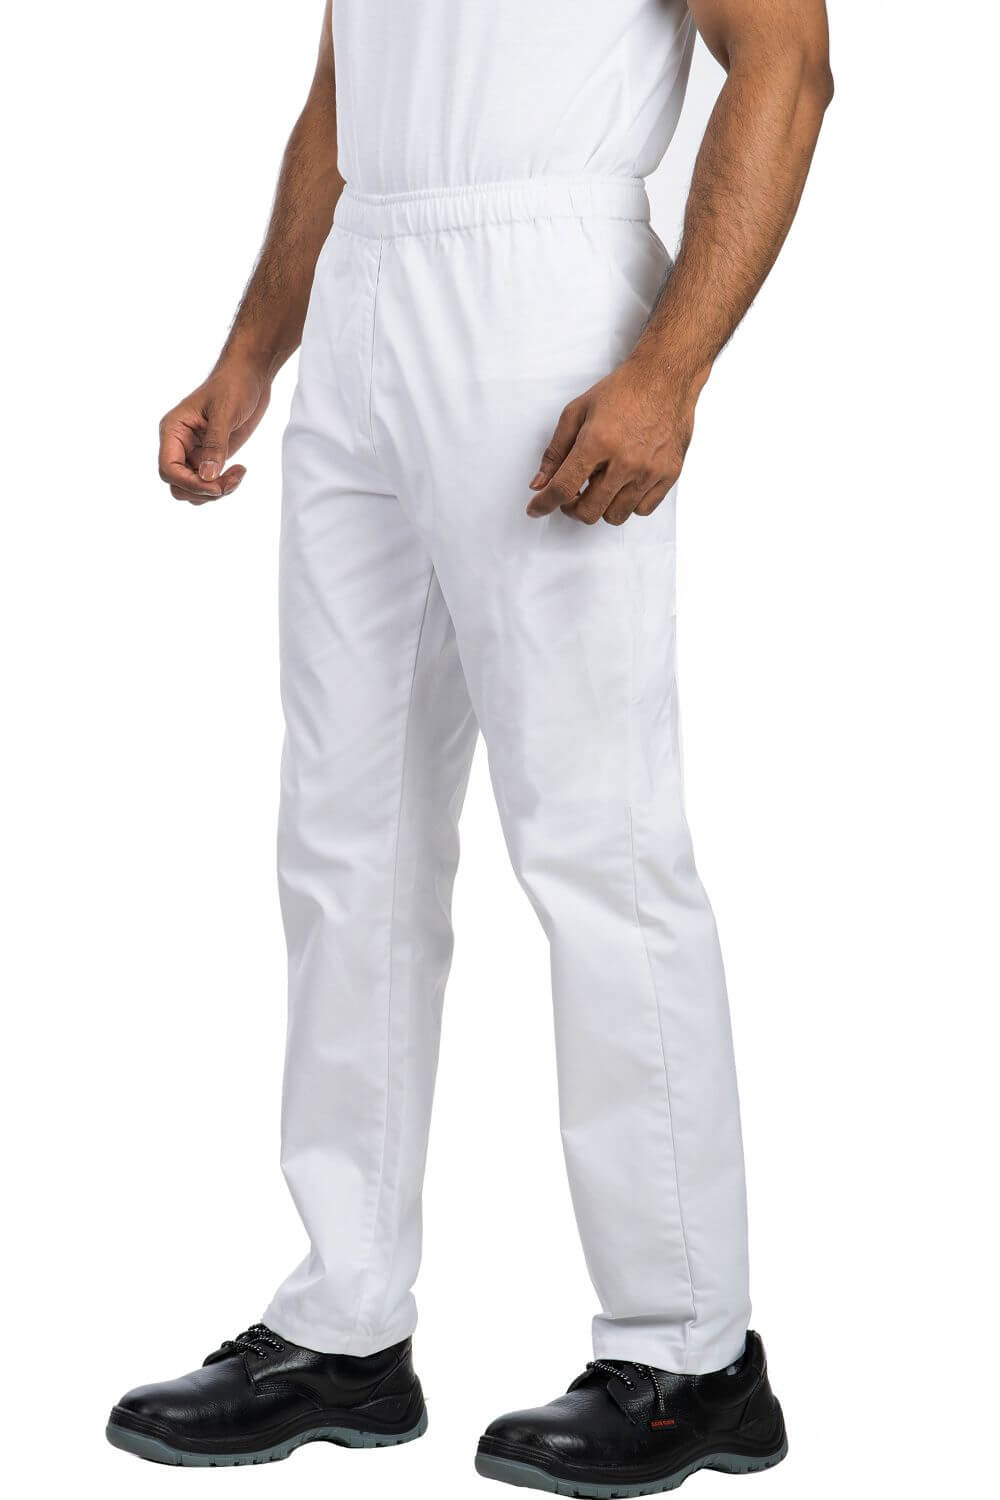 Easy fit elasticated Waist Cotton Blend Chef Trouser